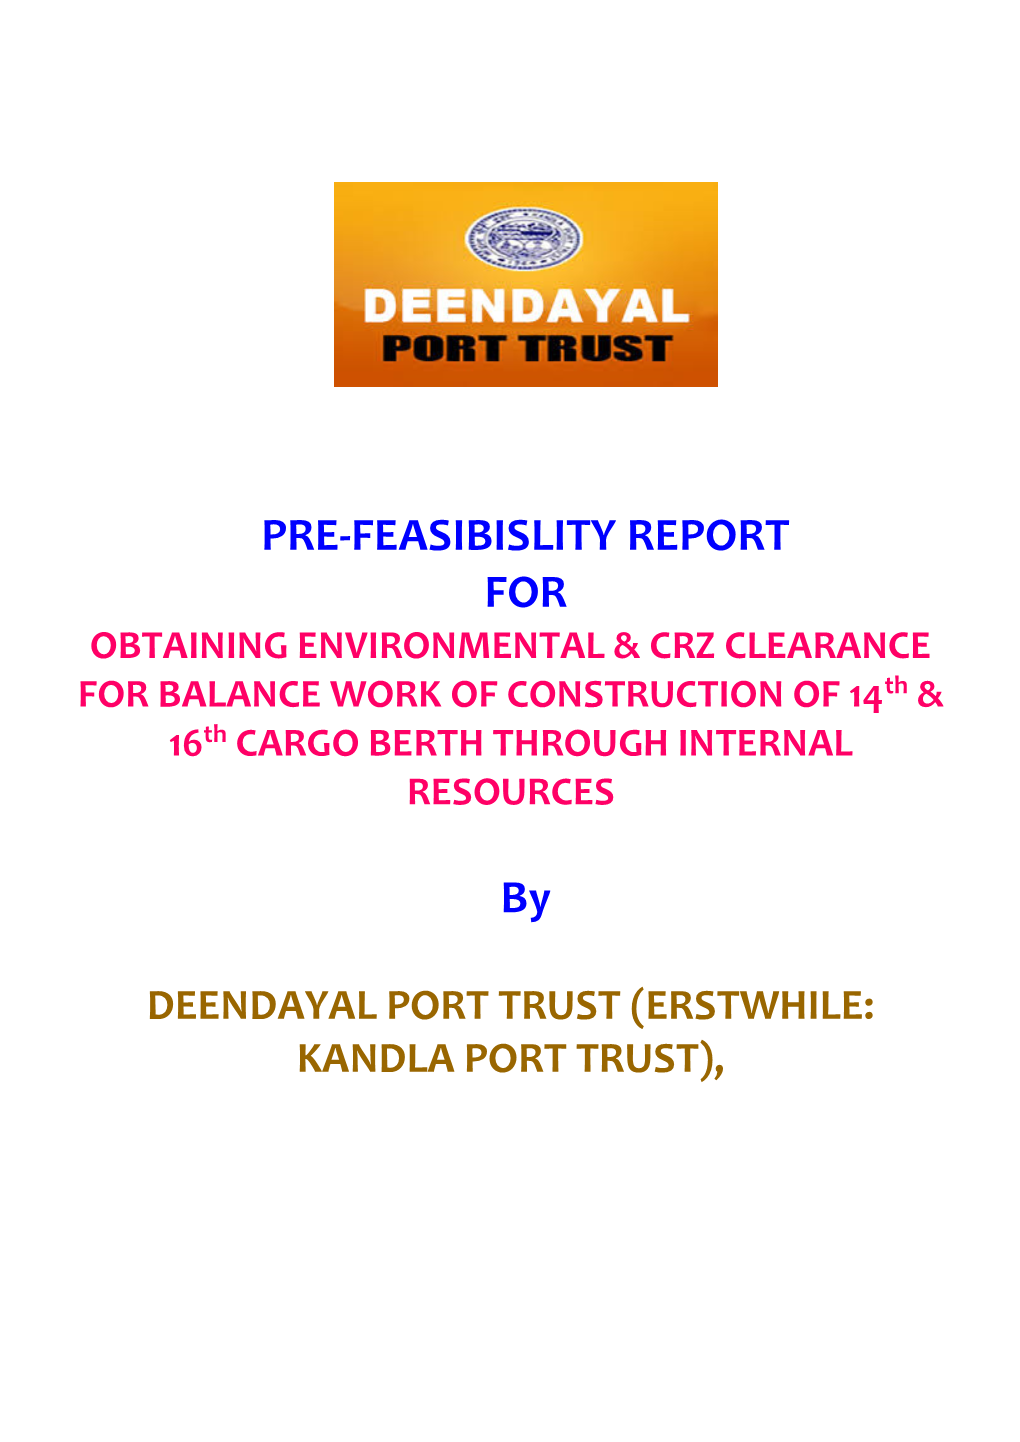 PRE-FEASIBISLITY REPORT for By